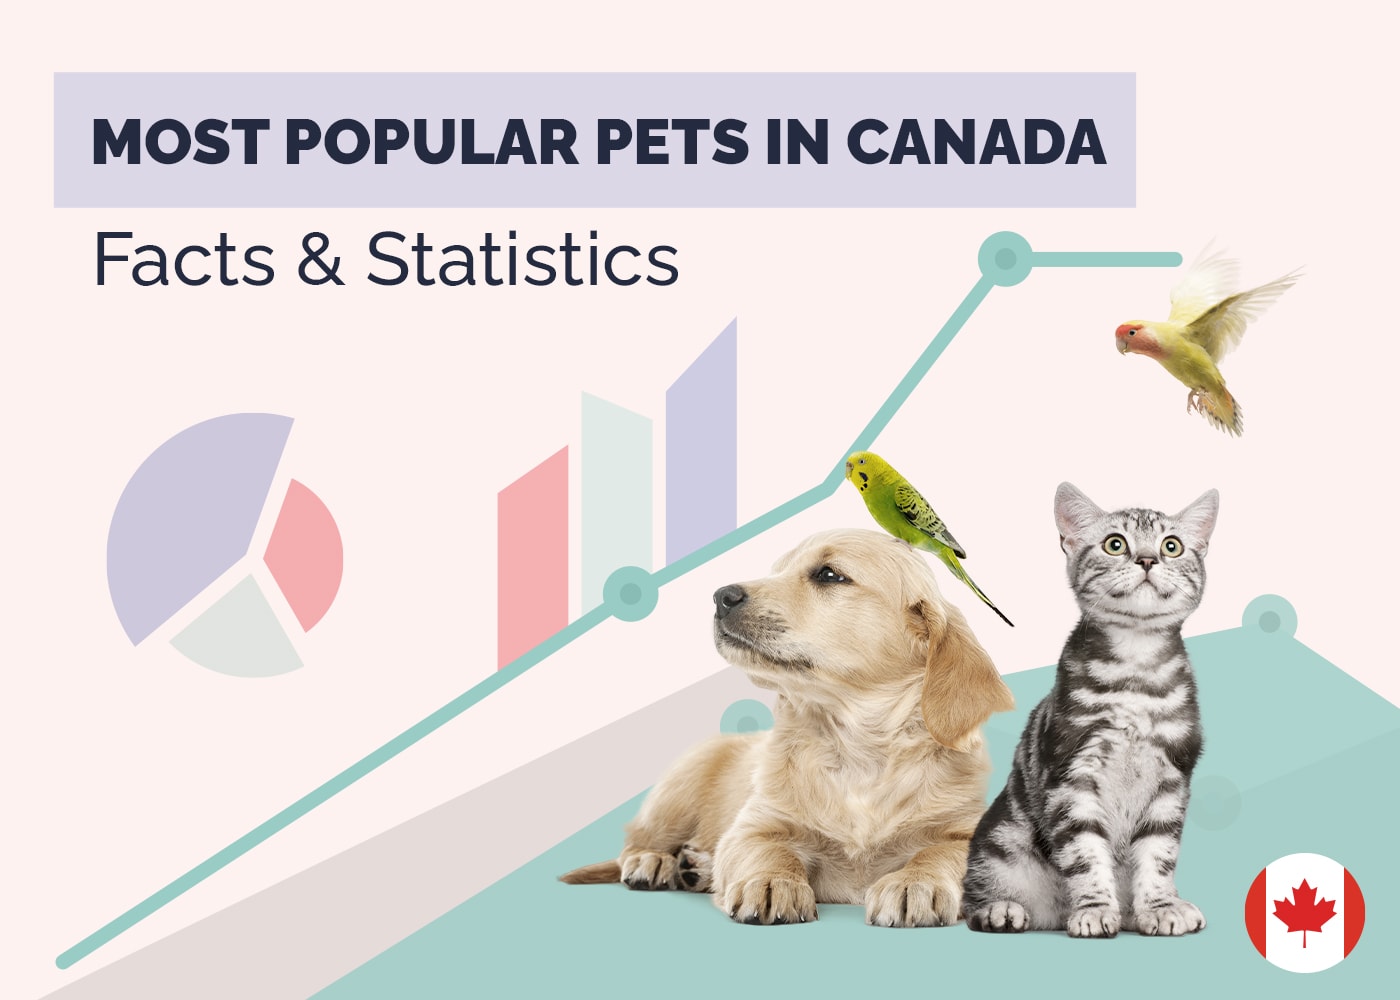 Most Popular pets in Canada Facts & Statistics